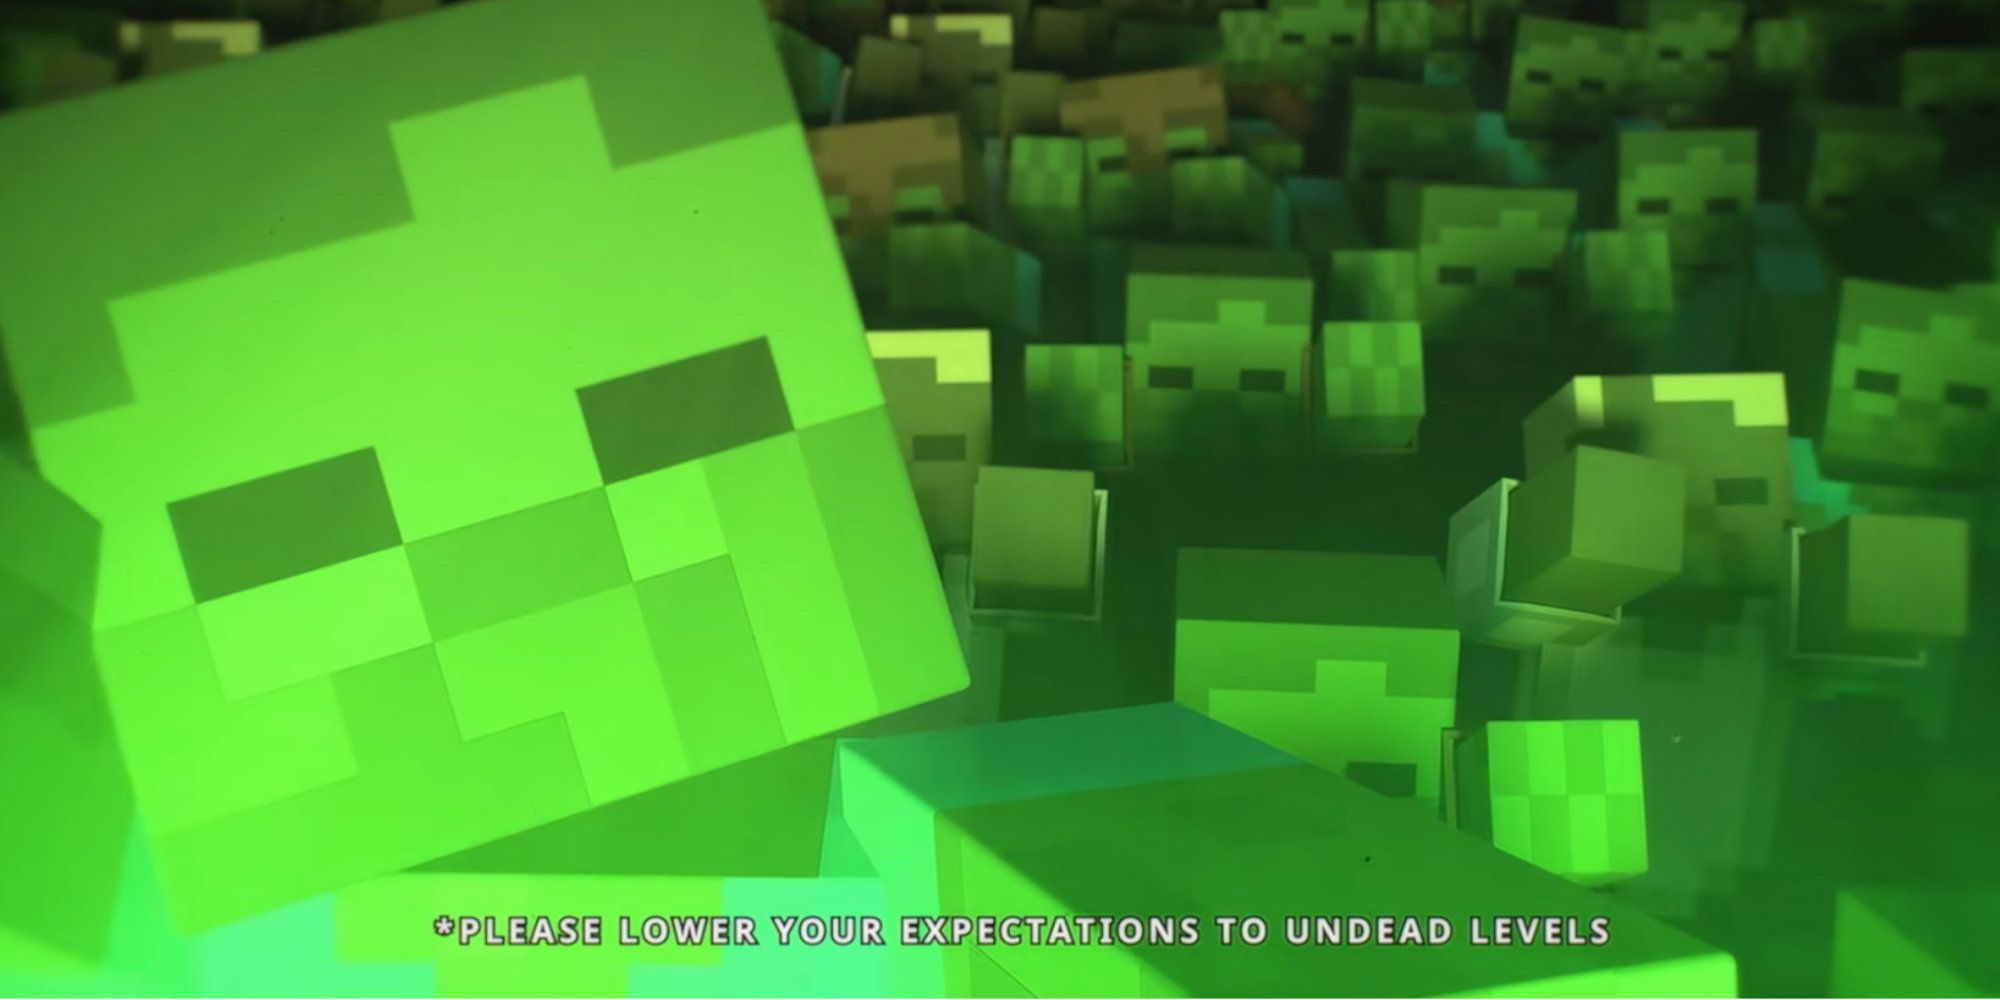 Minecraft live crowd of zombies saying please lower your expectations to undead levels